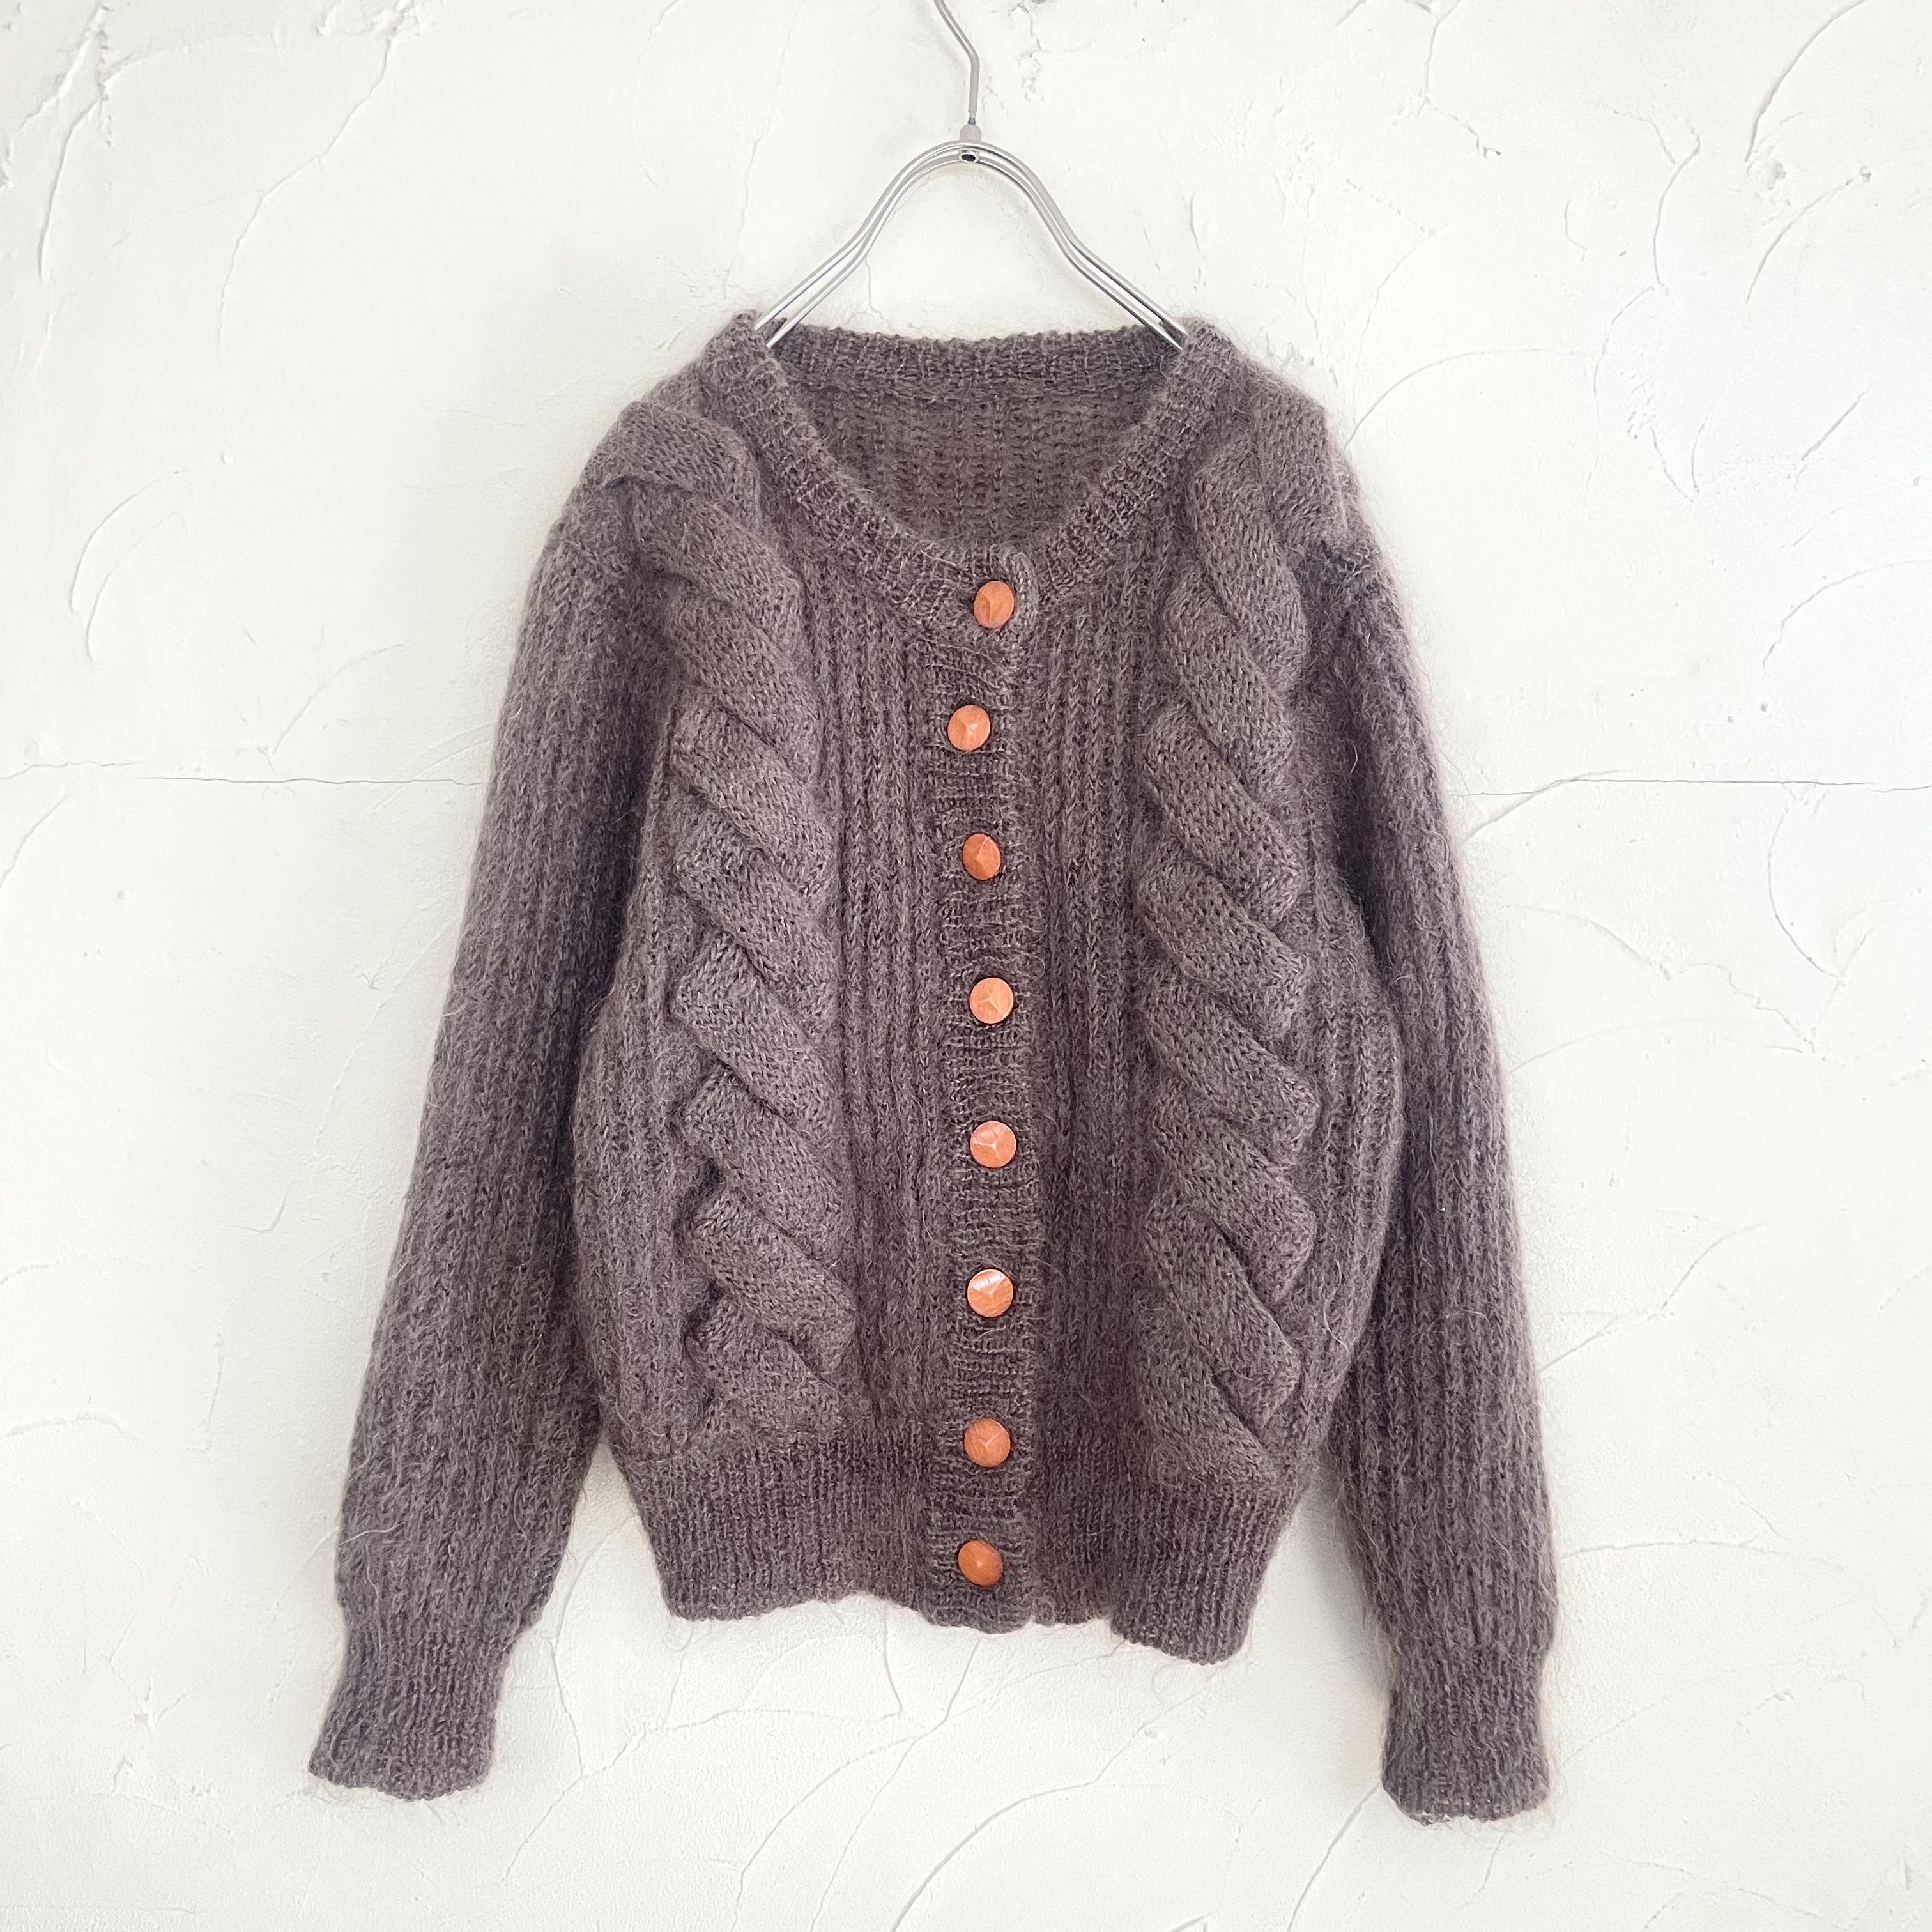 Brown cable knit cardigan